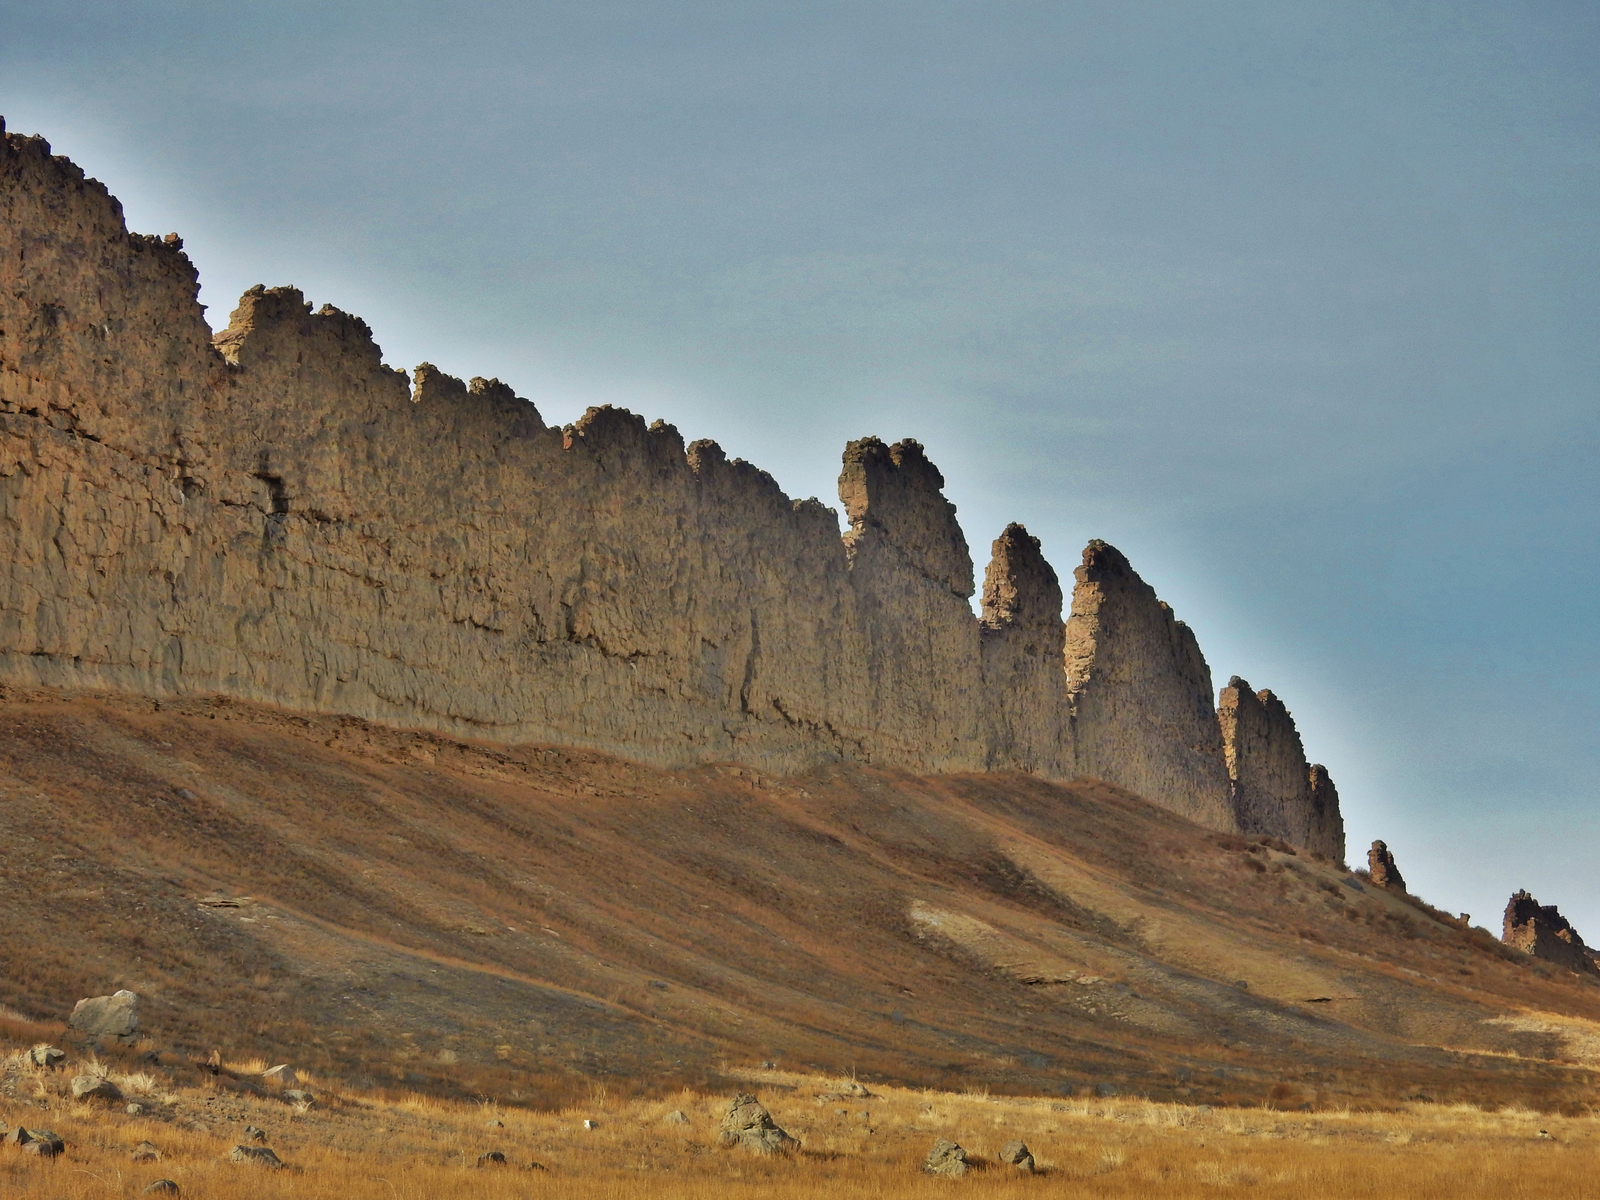 This photograph from Shiprock in northwestern New Mexico shows a ridge roughly 30 feet (about 10 meters) tall that formed from lava filling an underground fracture then resisting erosion better than the material around it did.